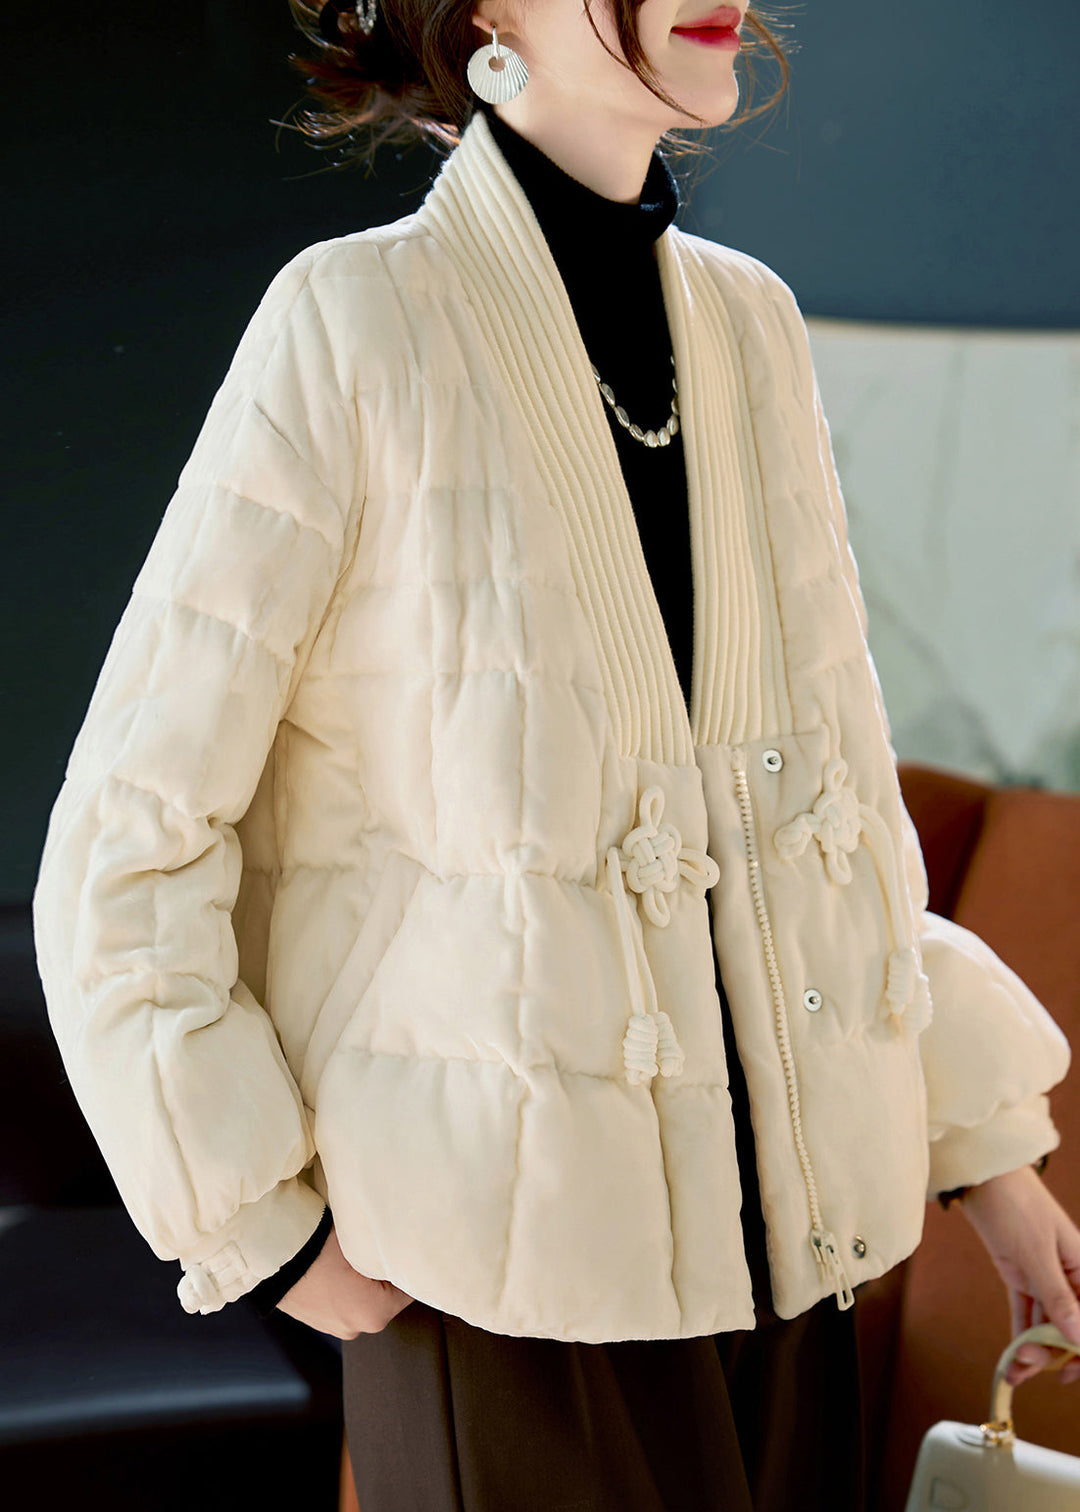 Elegant White V Neck Chinese Button Duck Down Puffers Jackets Winter